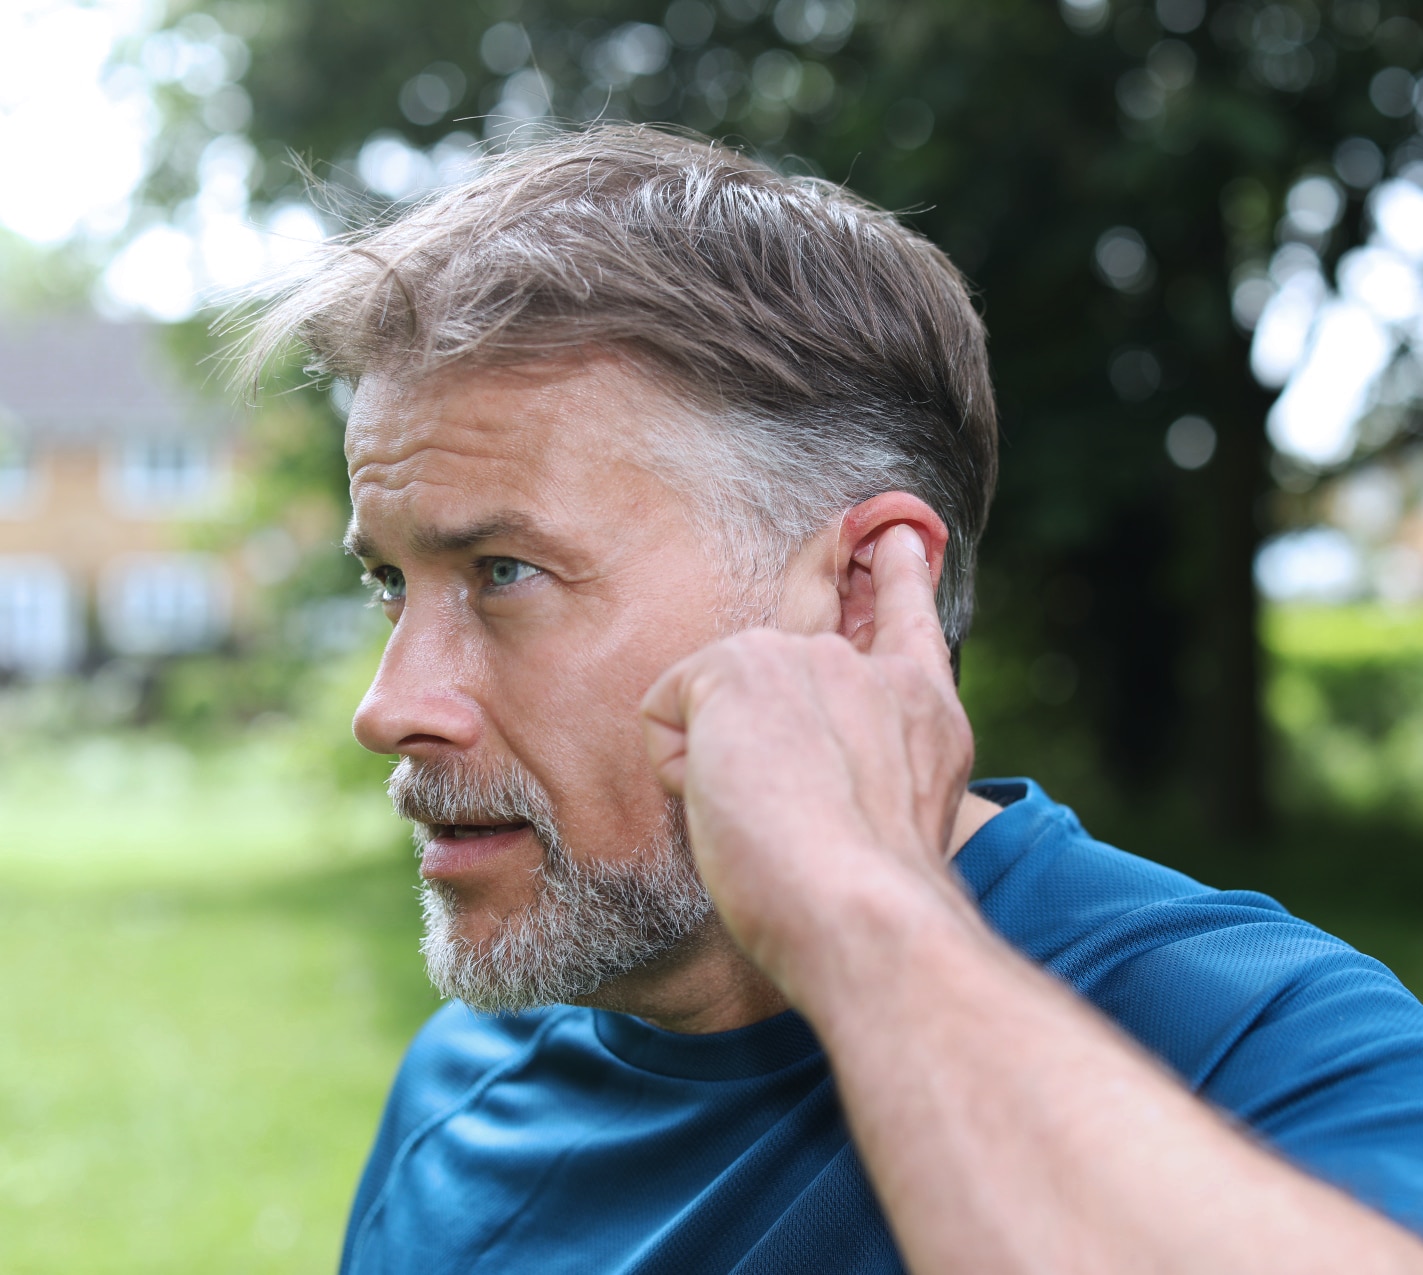 A man out for a jog taps on his left hearing aid to answer a call.